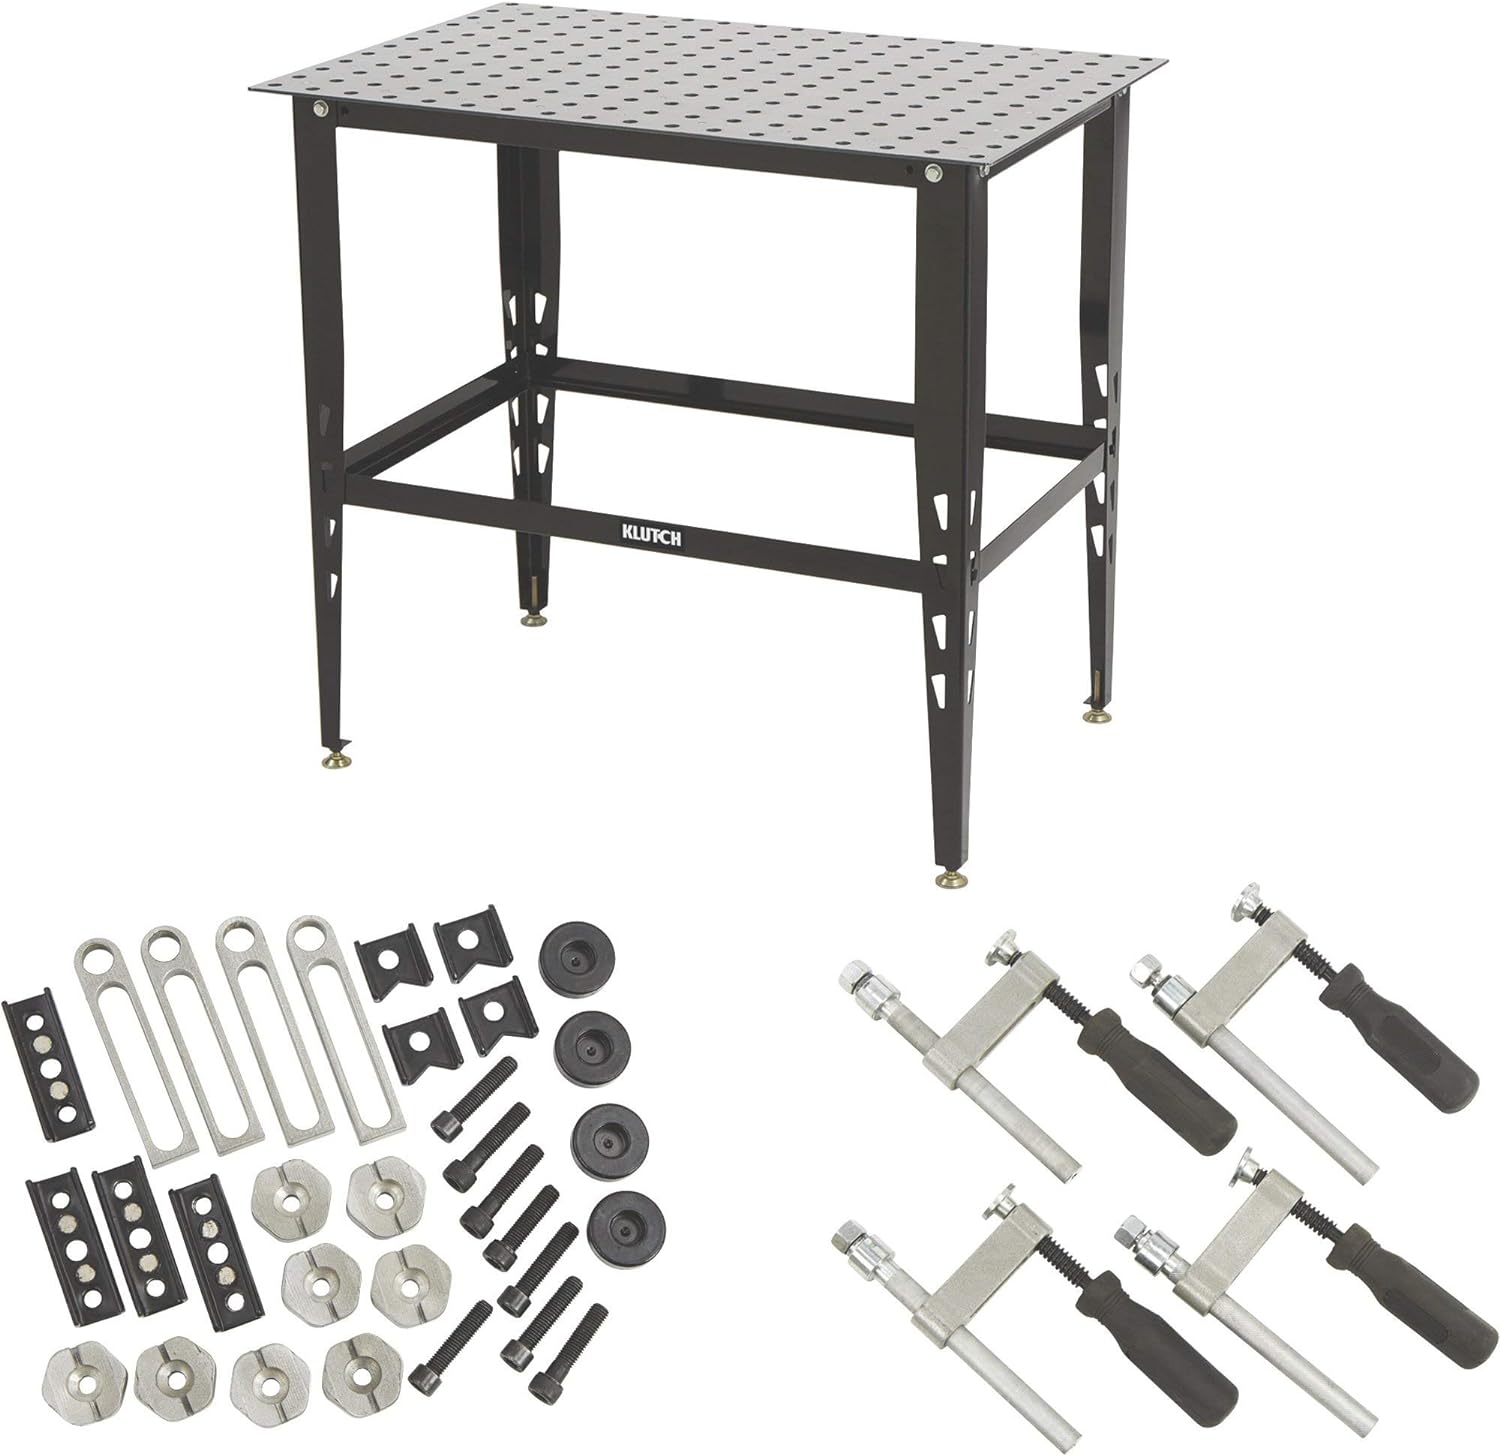 Klutch Steel Welding Table with Tool Kit